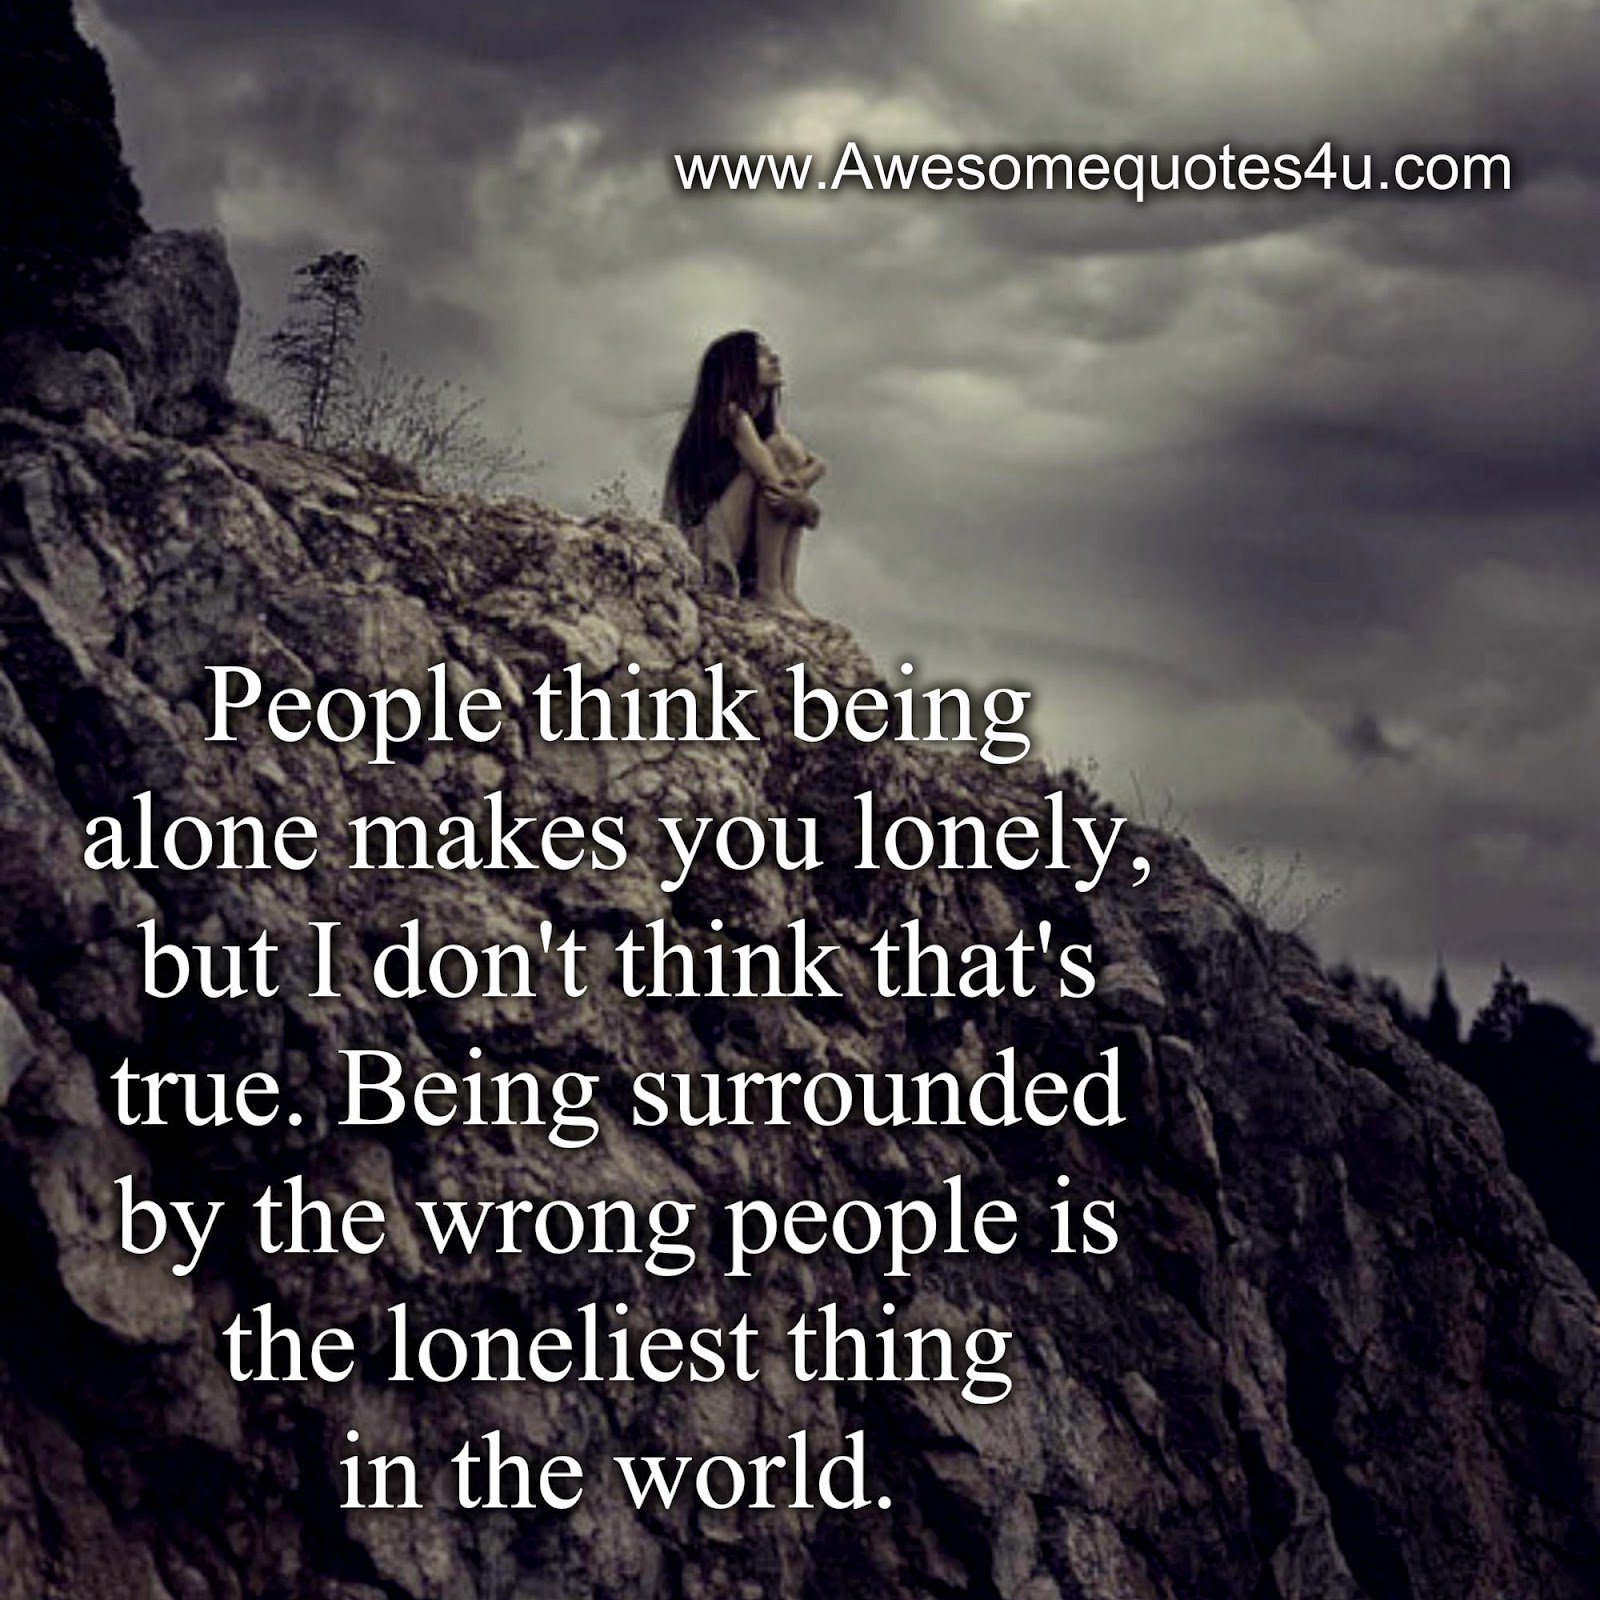 Awesome Quotes: People think being alone makes you lonely